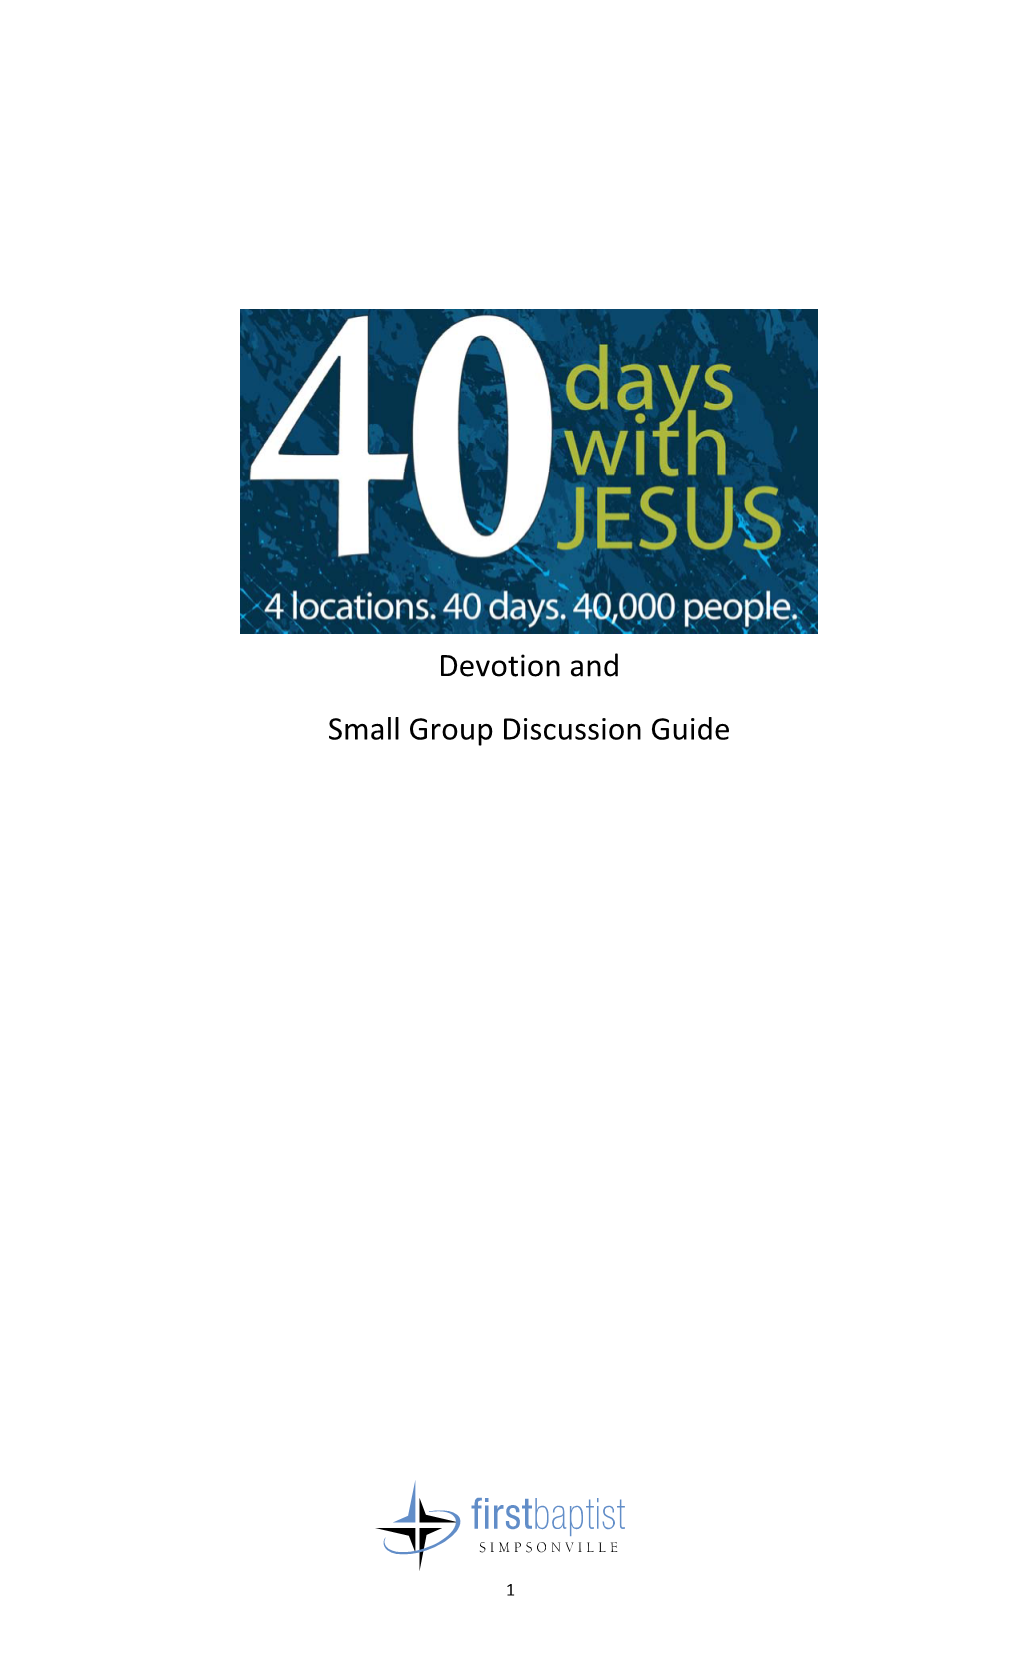 Devotion and Small Group Discussion Guide